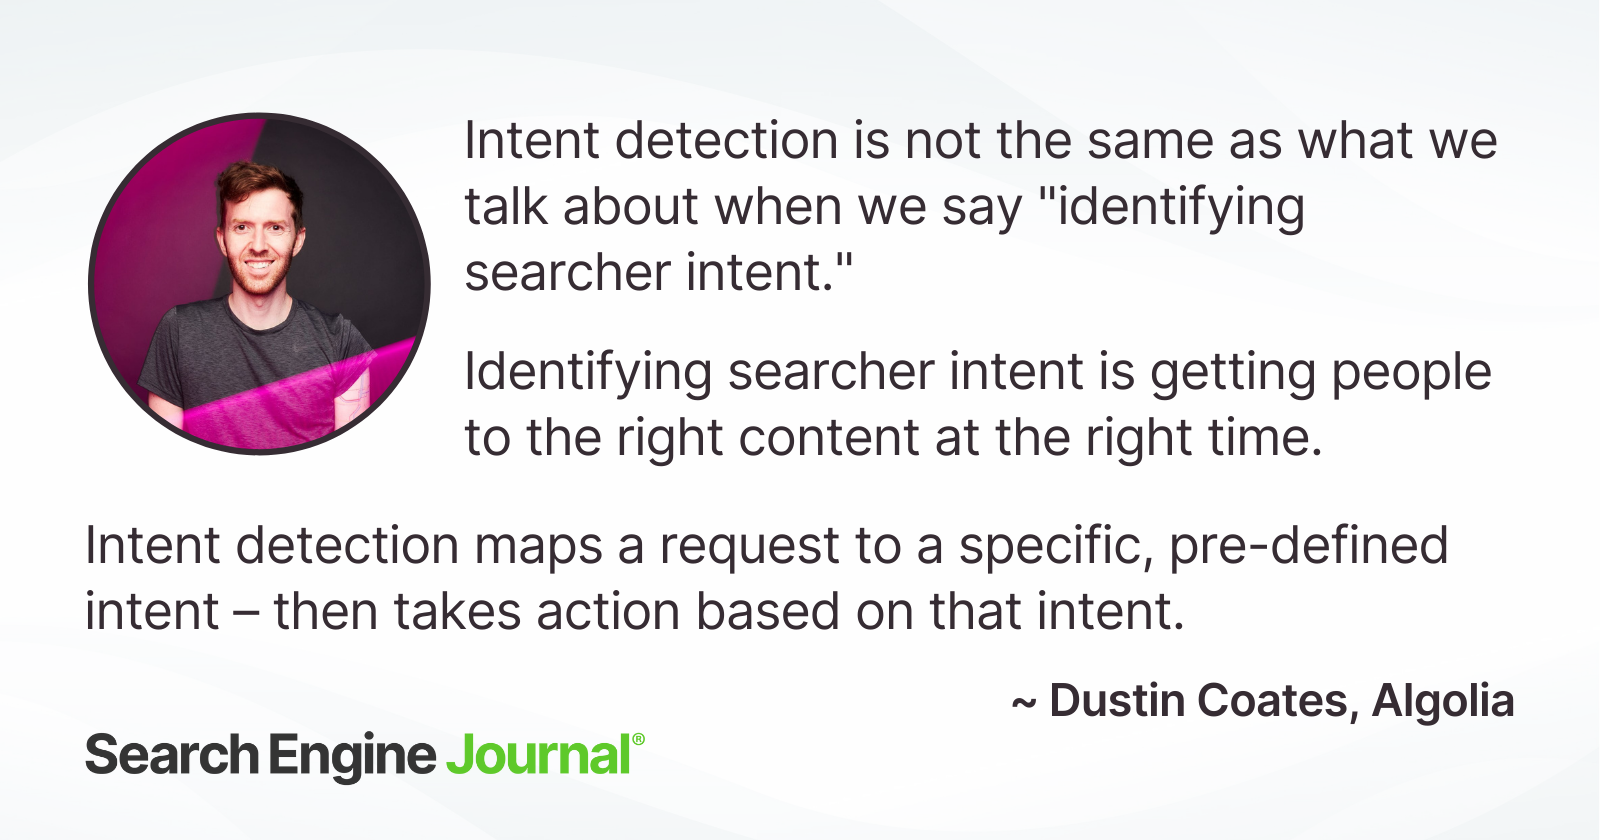 Intent detection maps a request to a specific, pre-defined intent – then takes action based on that intent.